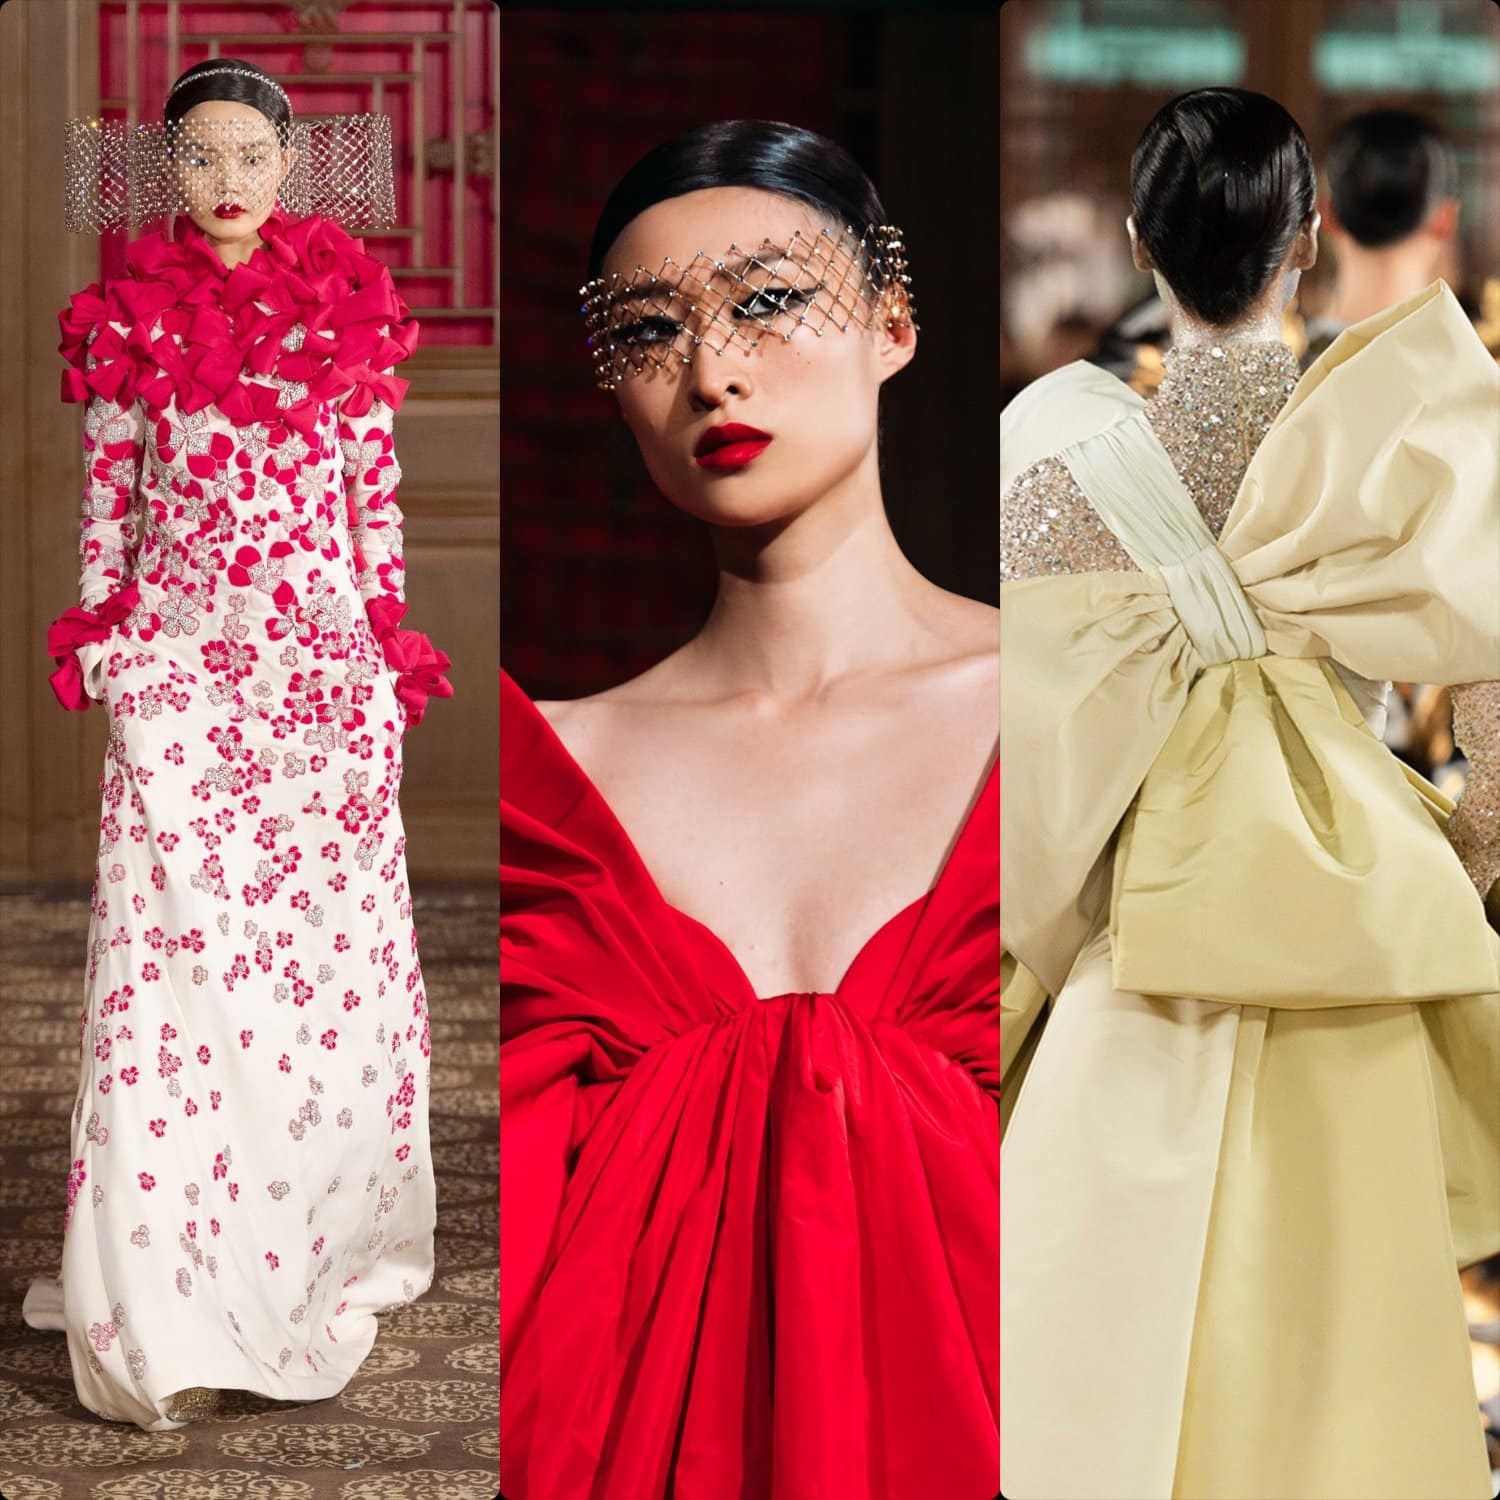 Valentino Haute Couture Beijing fashion show "DayDream", November 7, 2019 At the summer palace in Beijing, collection by Pierpaolo Piccioli. RUNWAY MAGAZINE ® Collections. RUNWAY NOW / RUNWAY NEW